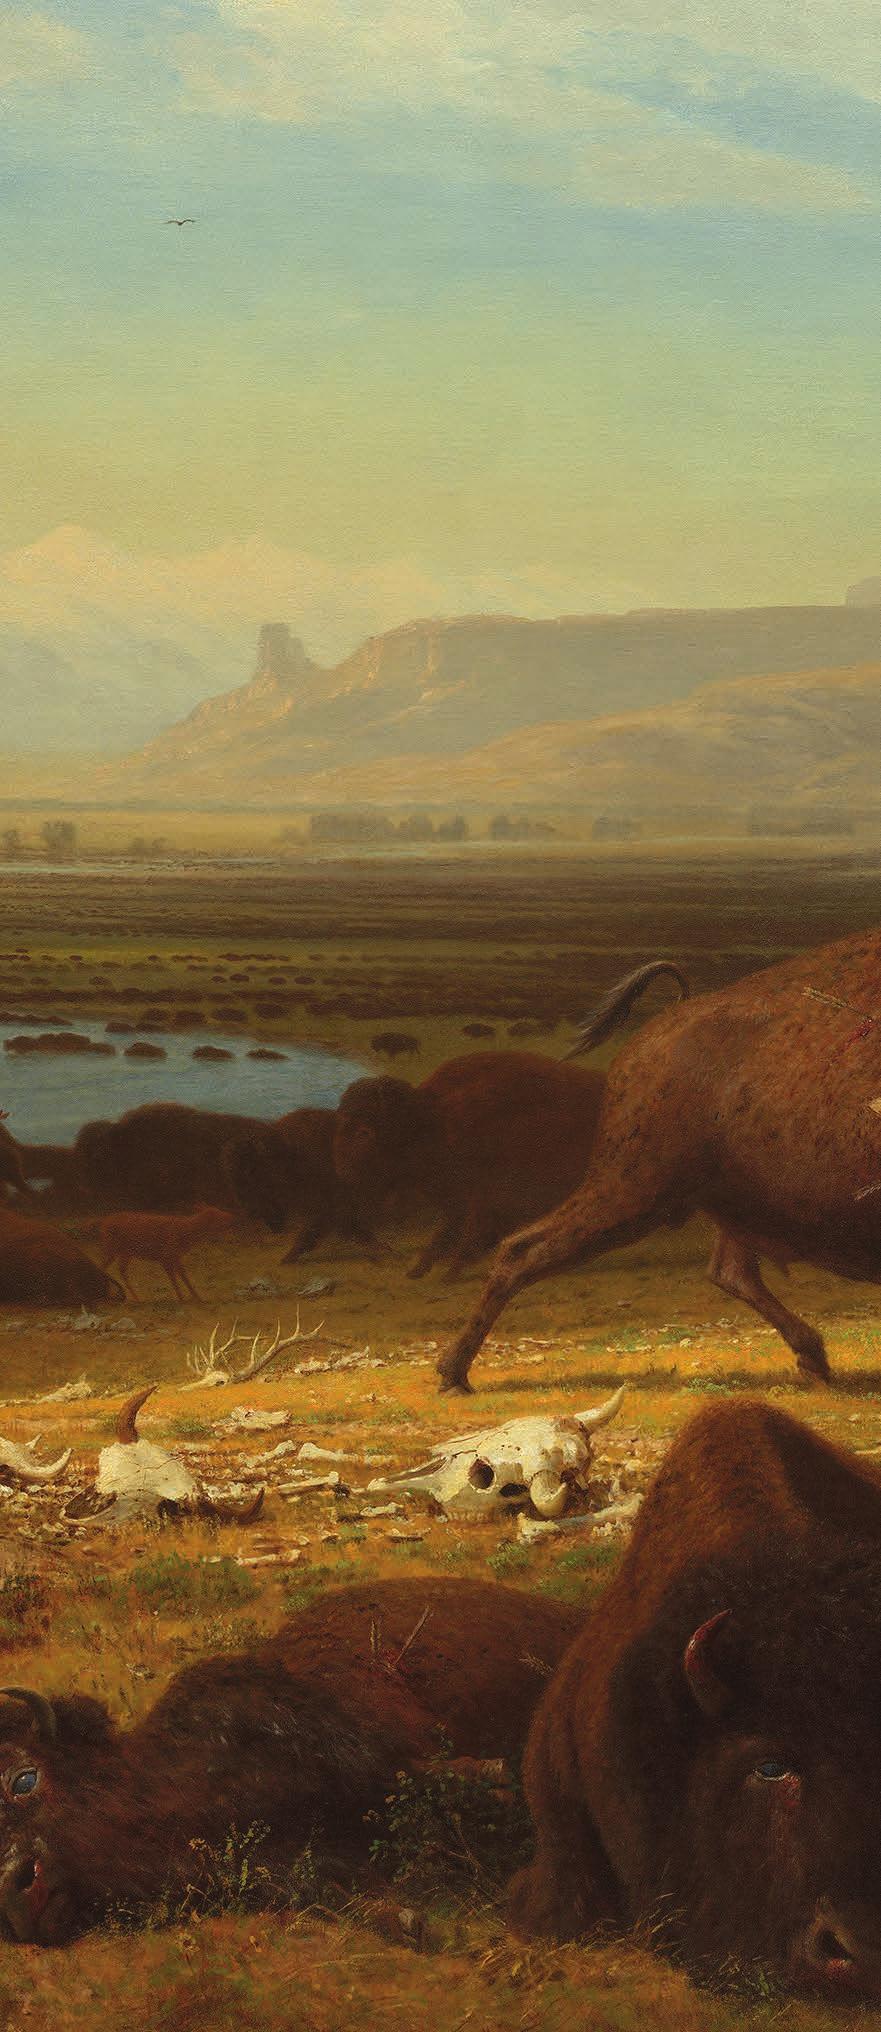 ONCE THEY HAD horses, the Plains Indians began to hunt on horseback. One well-aimed arrow could kill a buffalo weighing close to 2,000 pounds. The chase was dangerous.